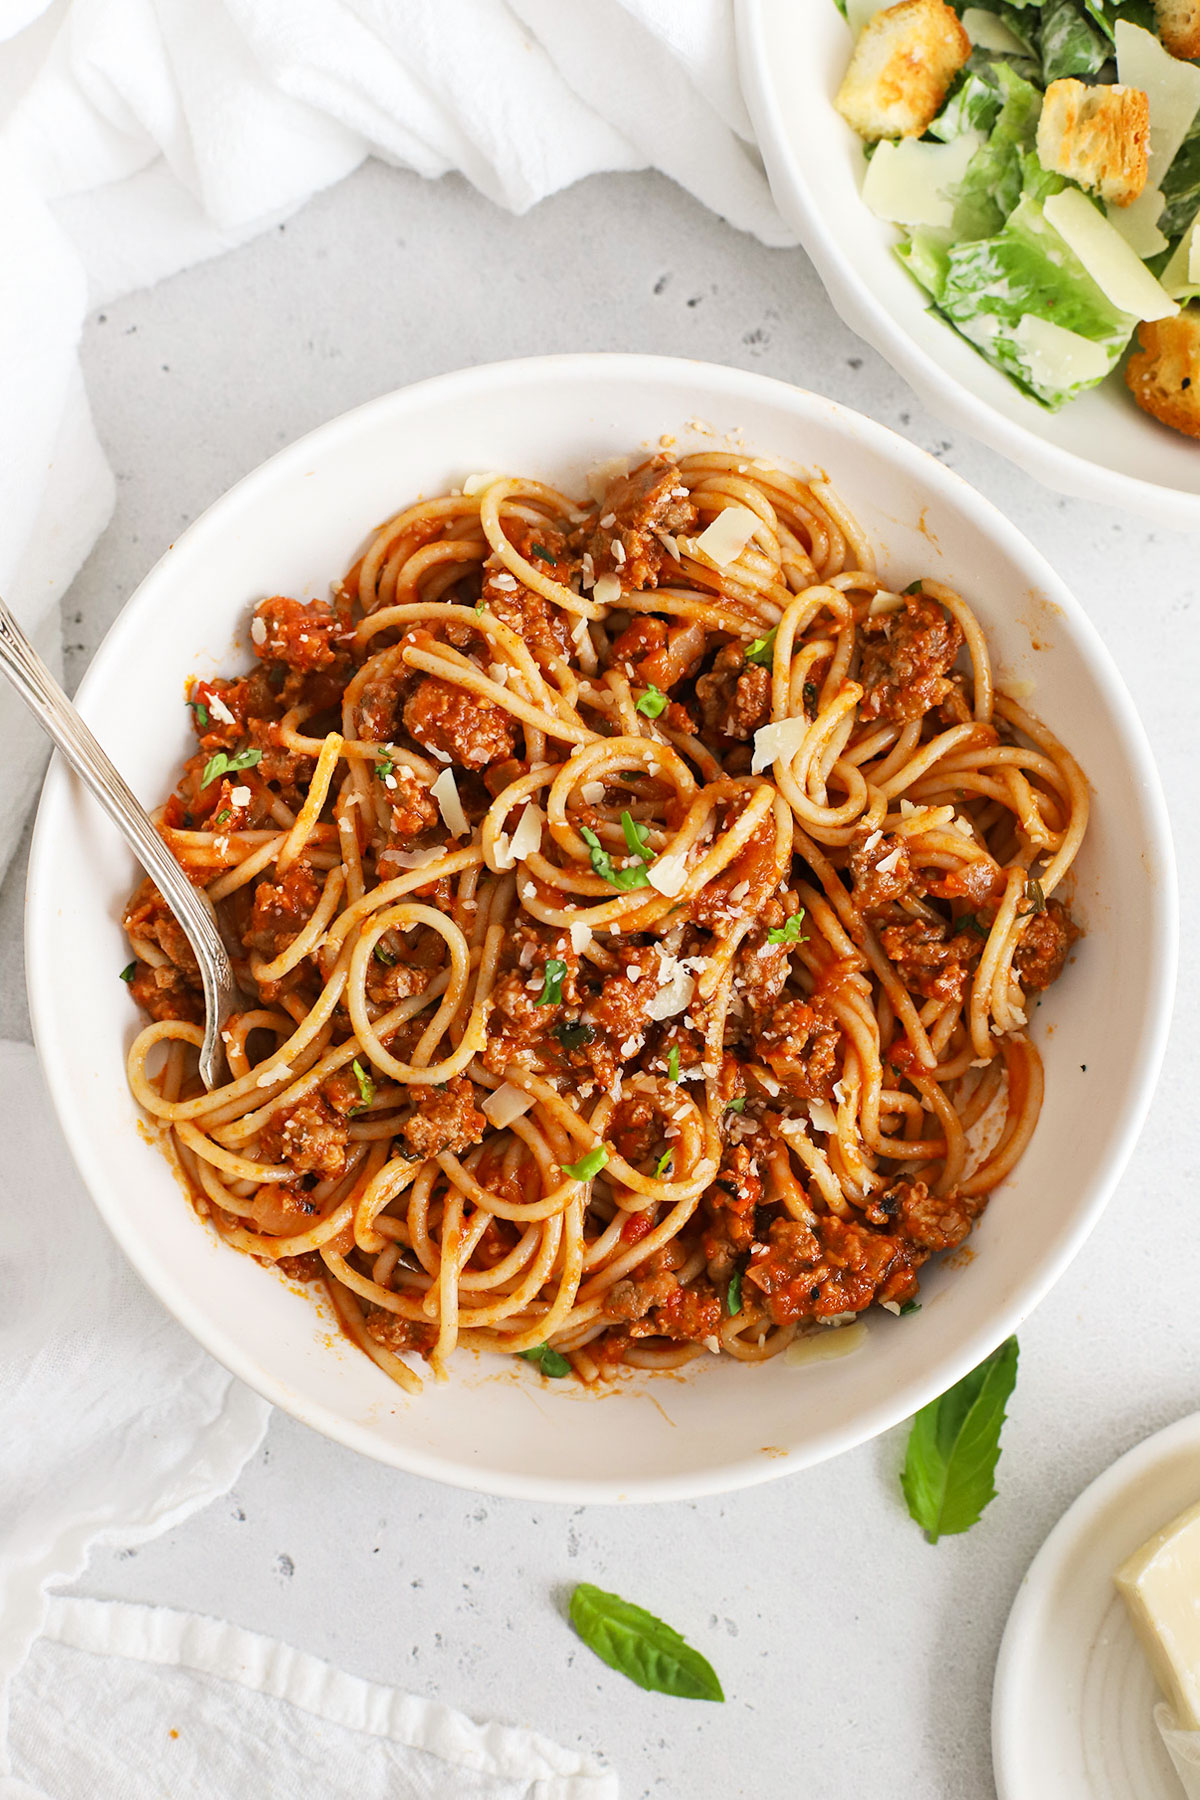 Gluten-free spaghetti tossed with gluten-free spaghetti sauce and parmesan cheese